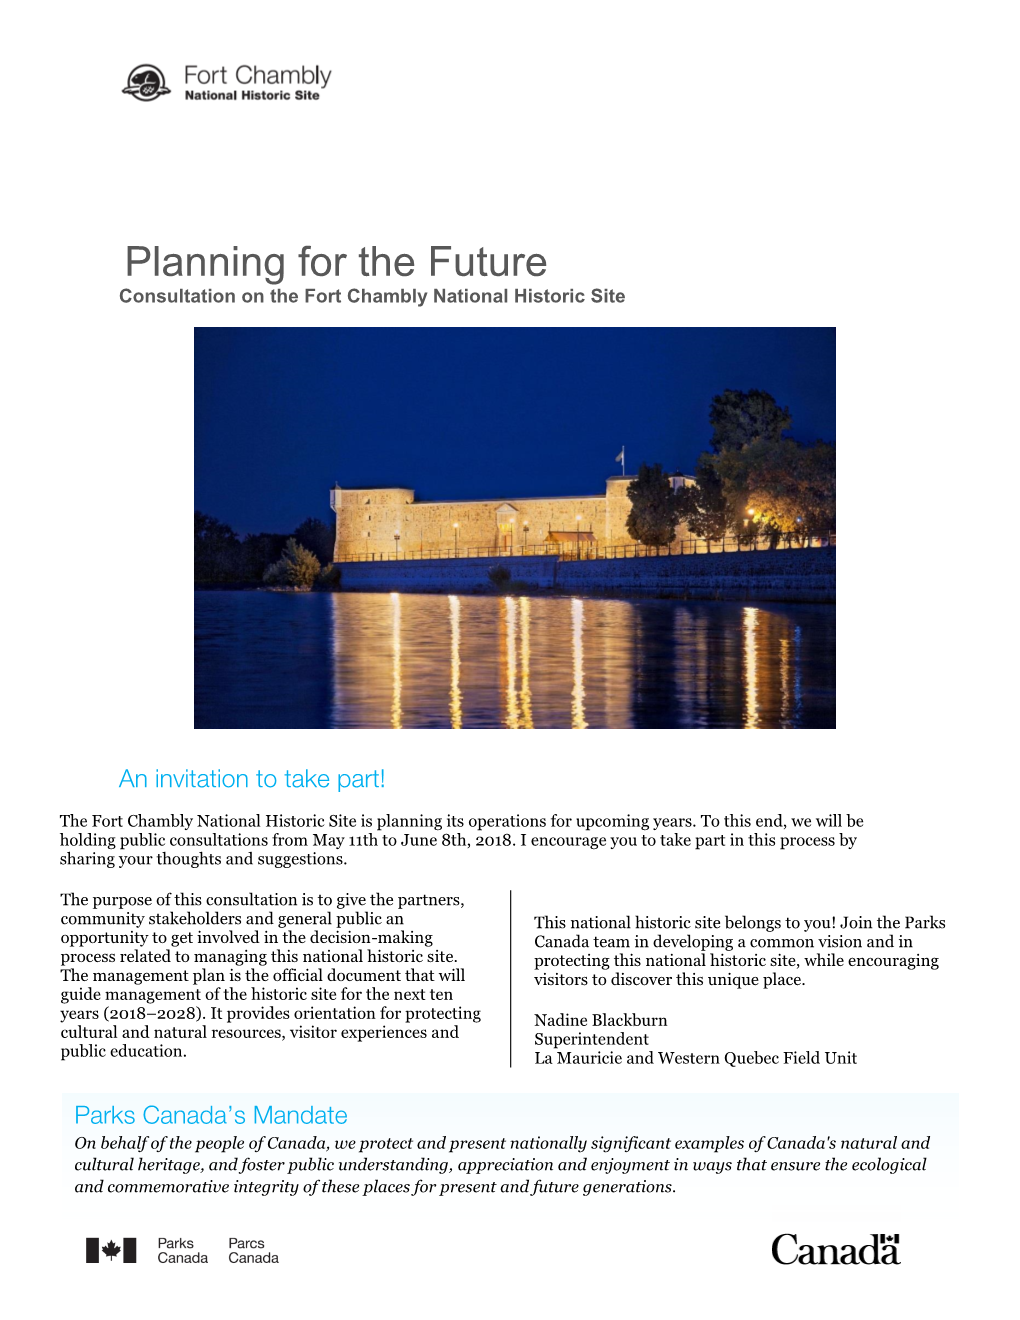 Consultation on the Fort Chambly National Historic Site